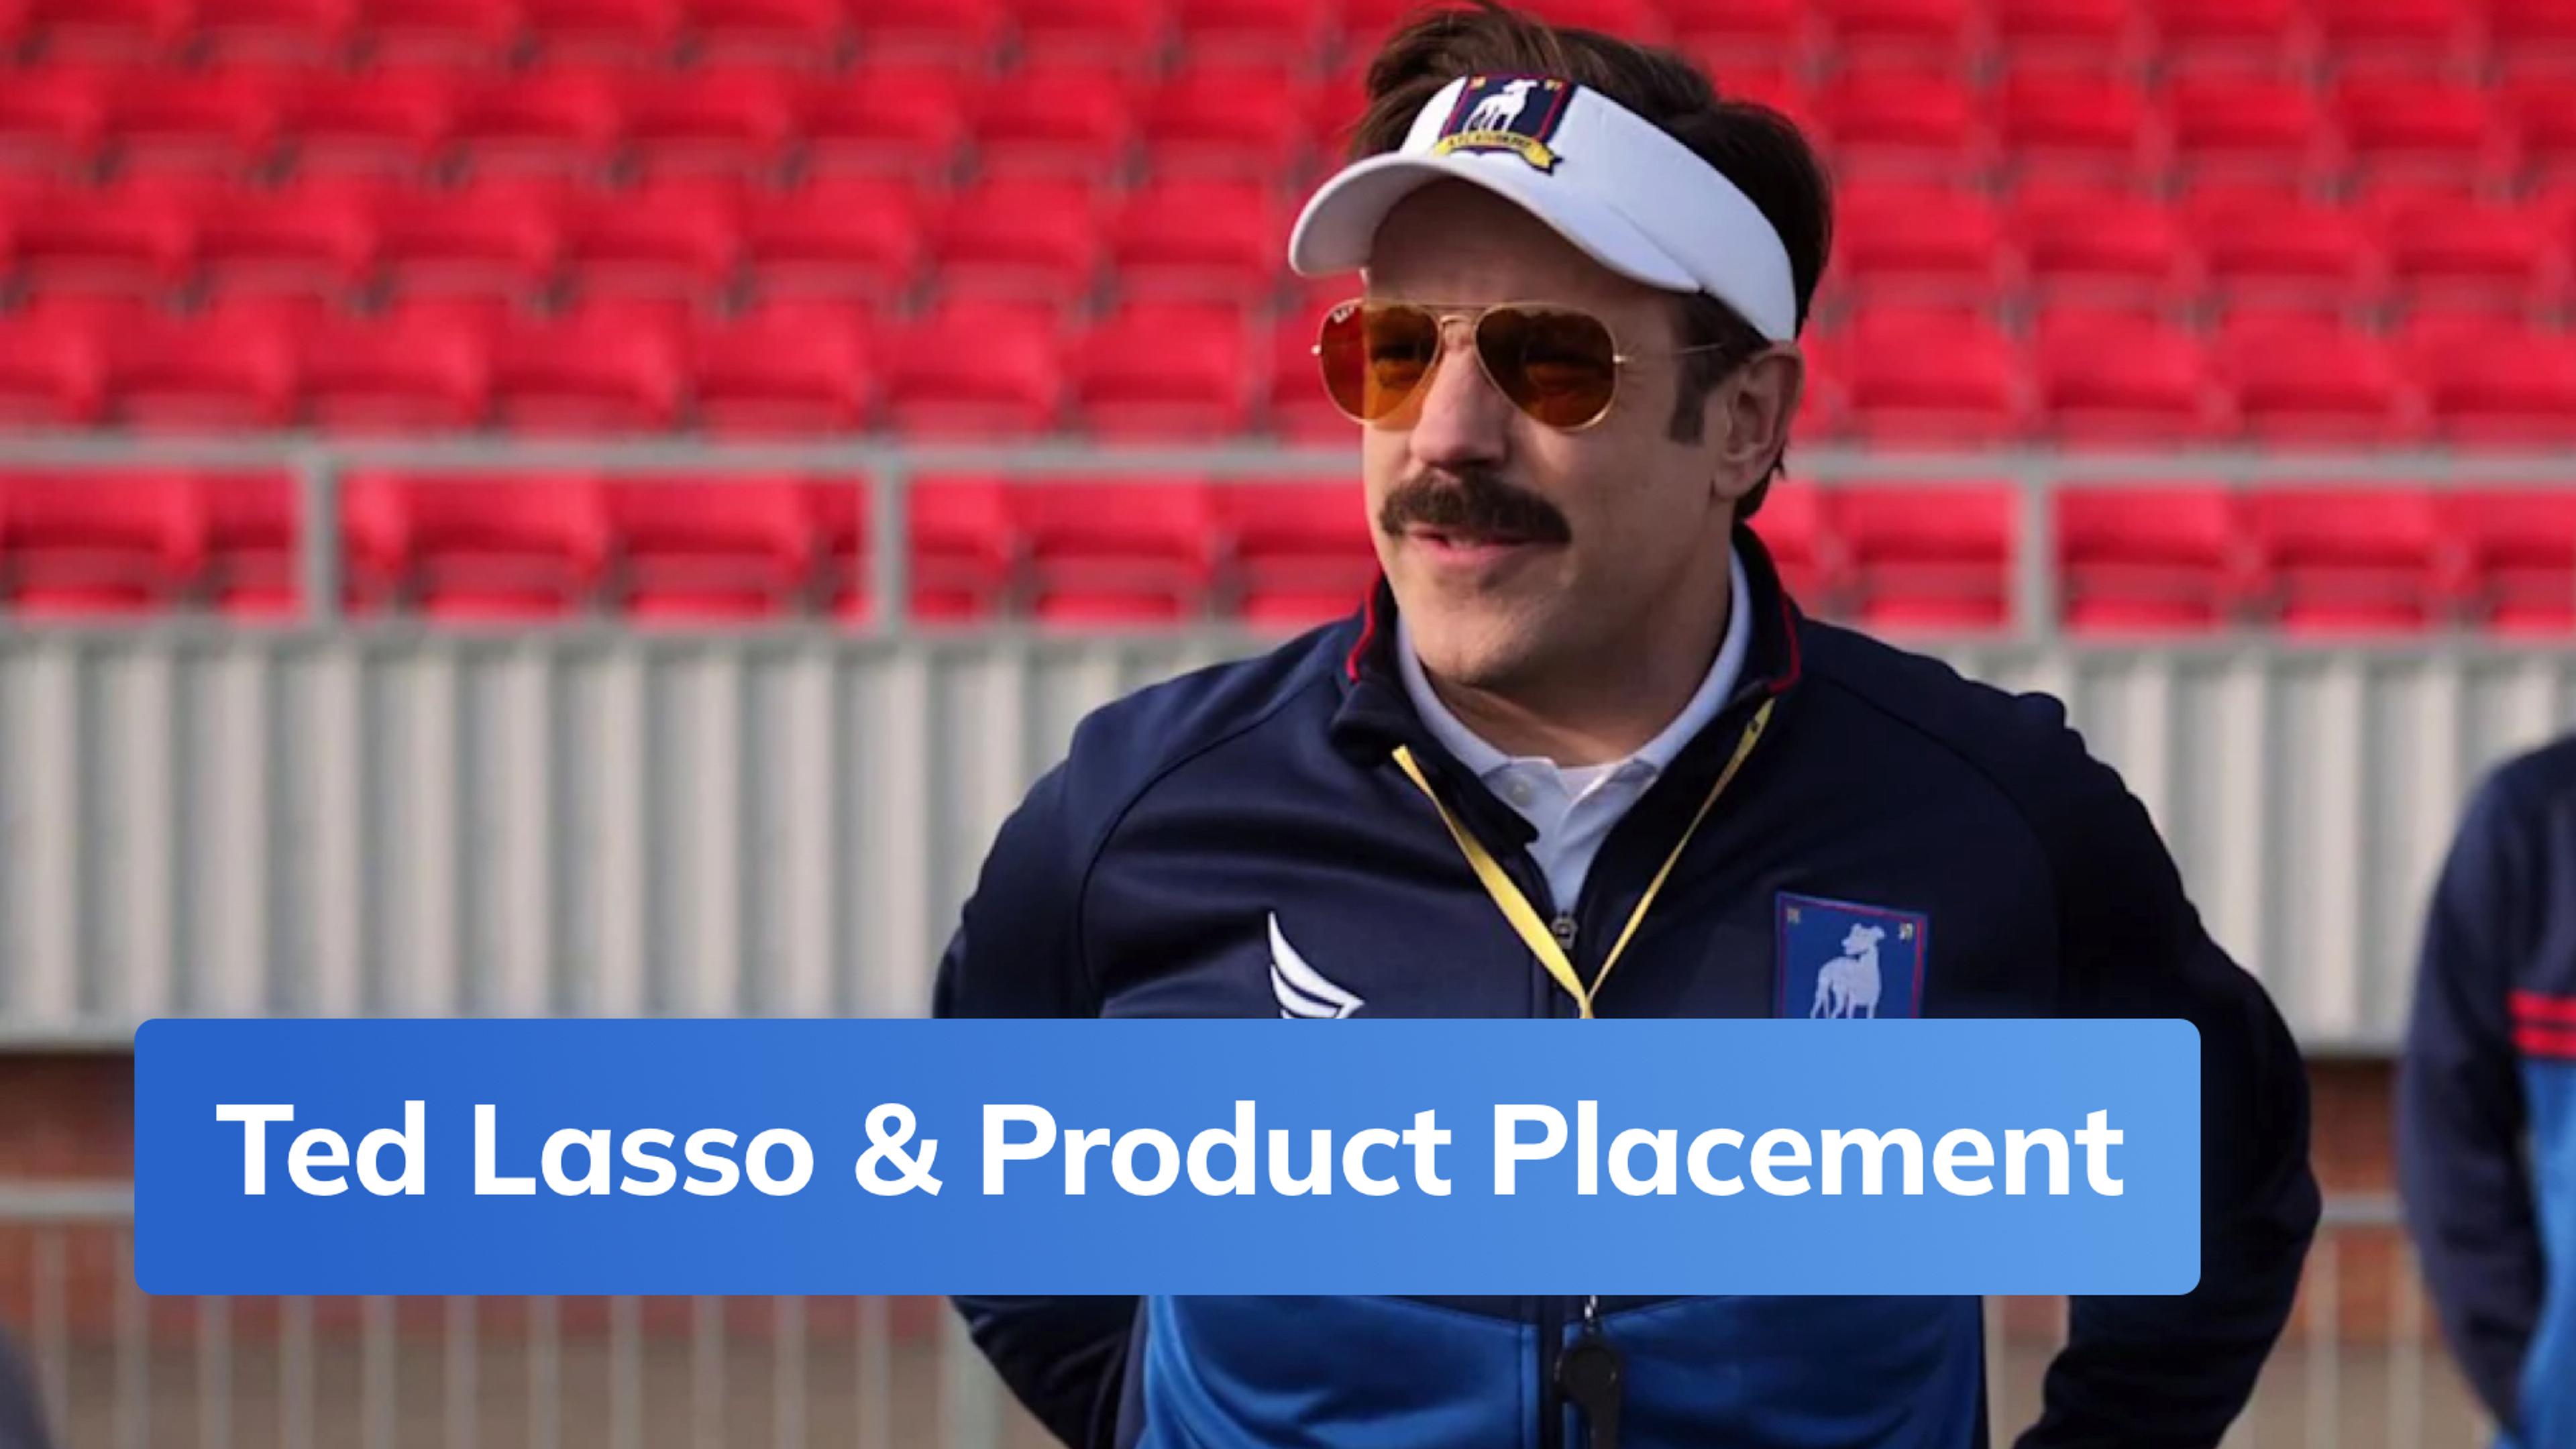 Ted Lasso & Product Placement